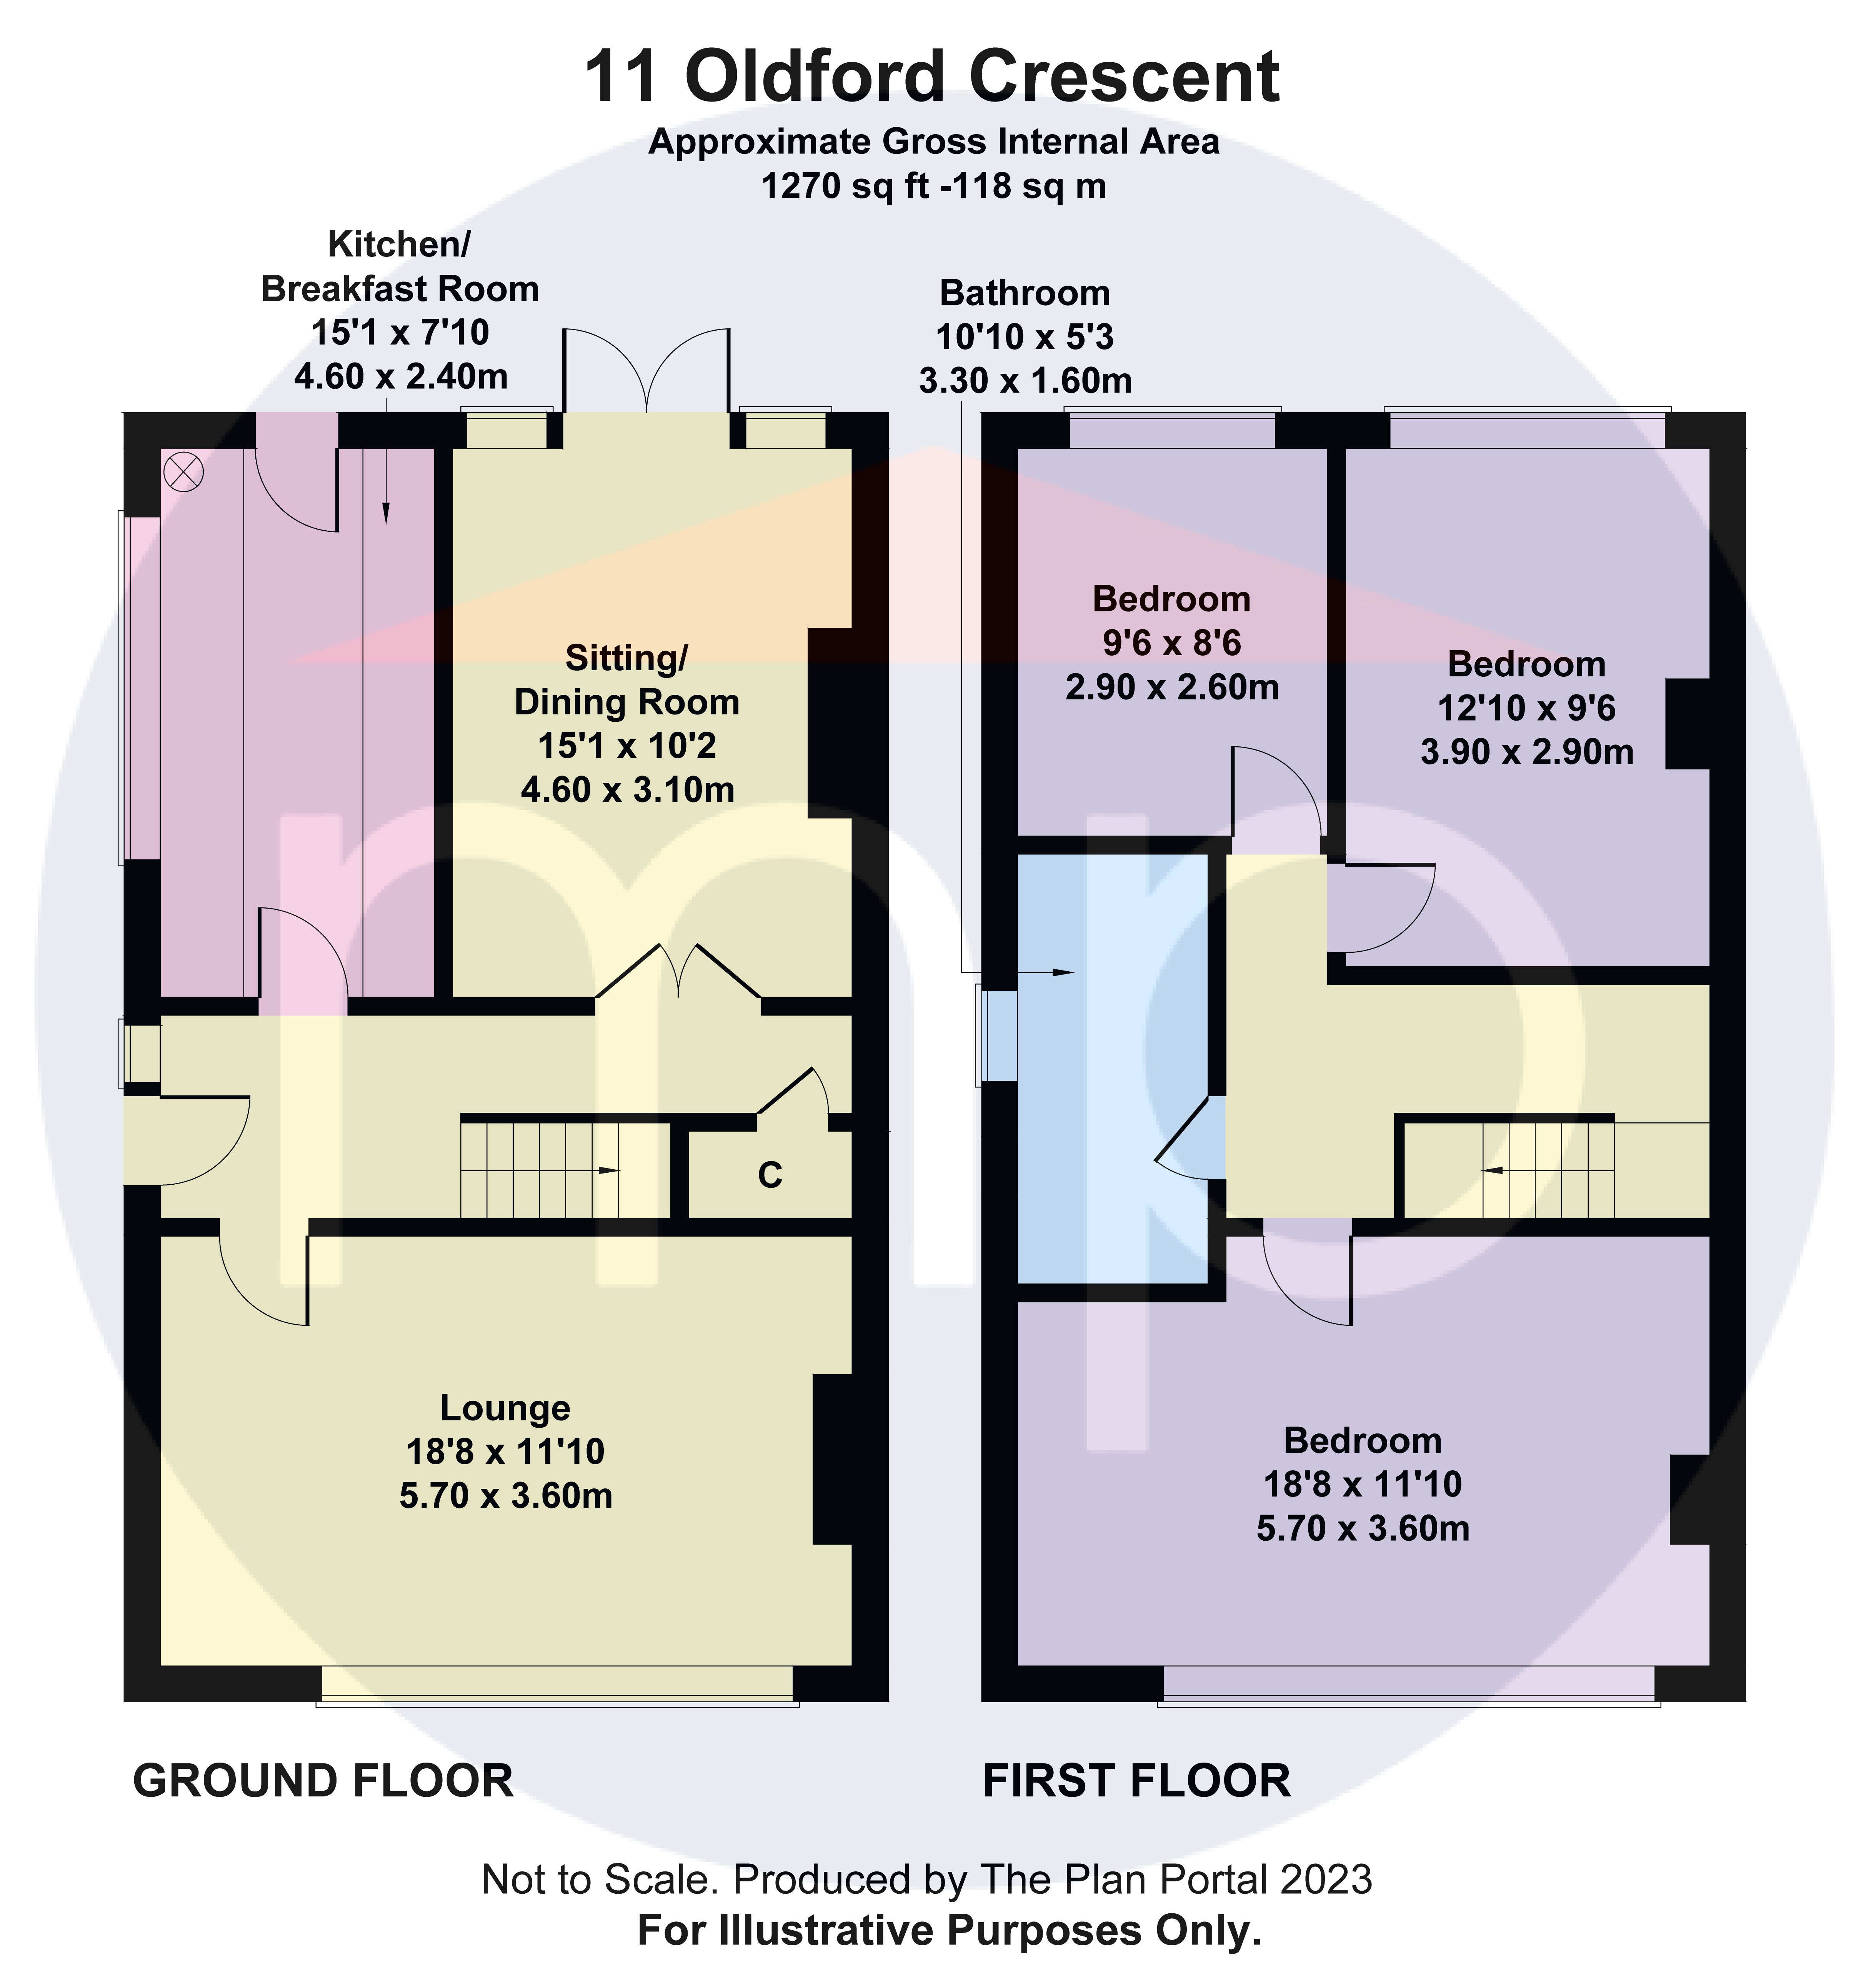 3 bed house for sale in Oldford Crescent, Acklam - Property floorplan